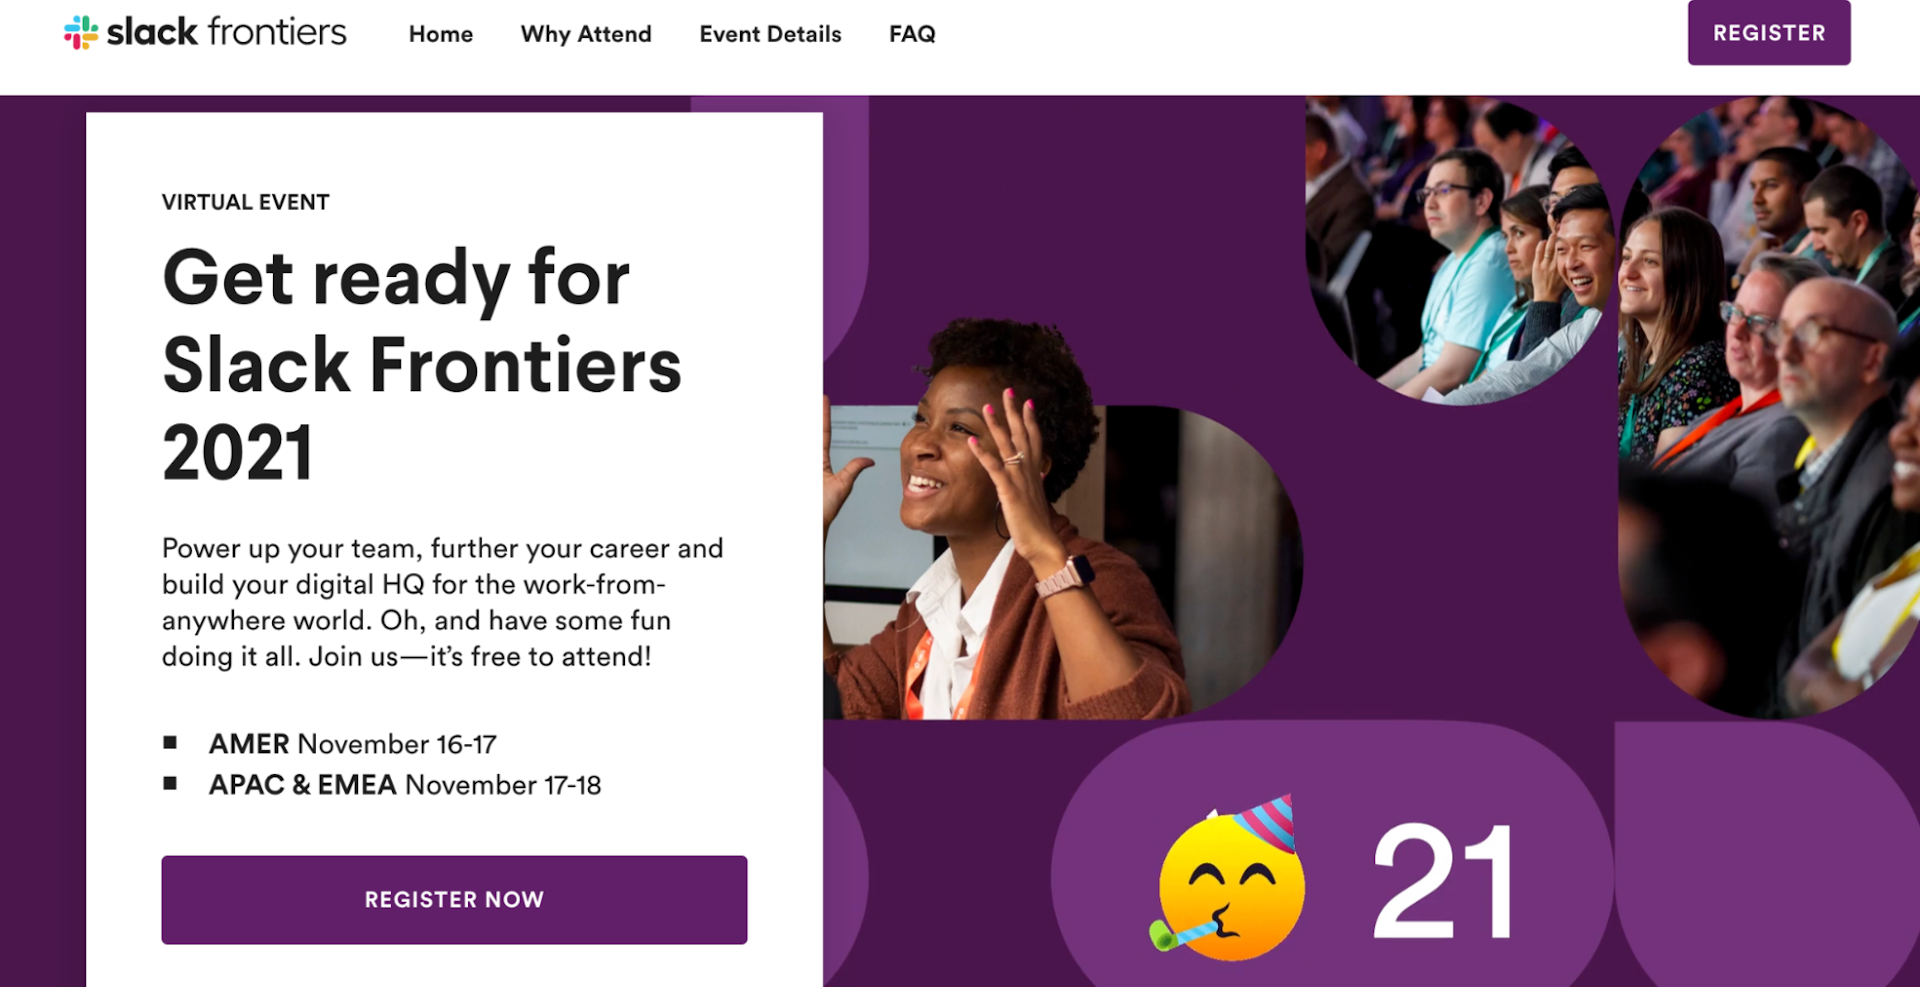 Screenshot of the Slack Frontiers event page